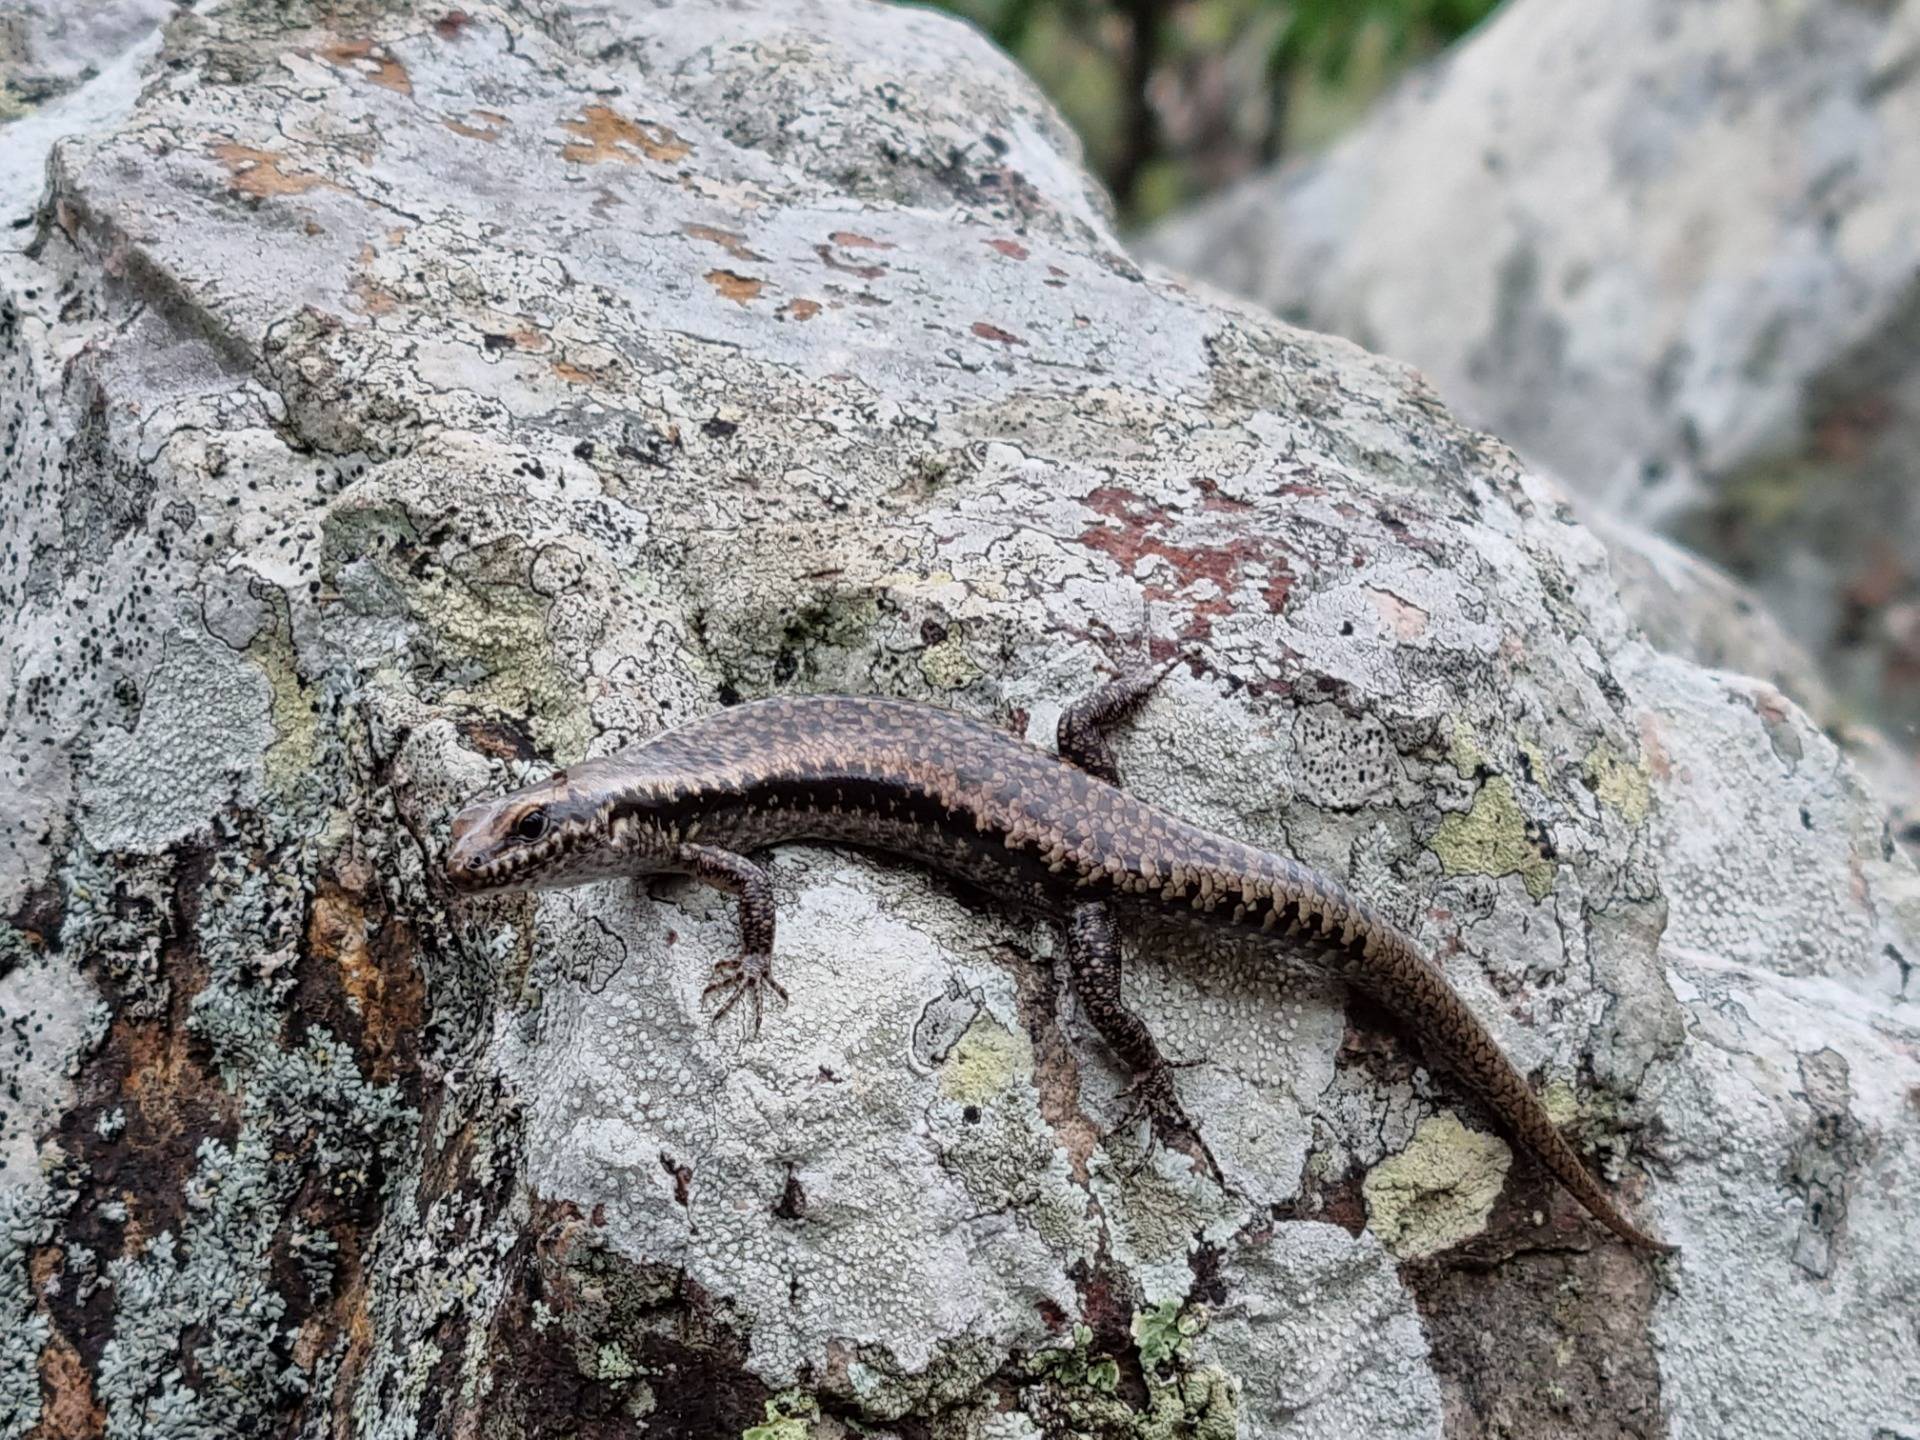 My usual close up lizard photo. Looks like this one has a new tail. You can just make out the different pattern, these skinks can drop there tail when threatened and can grow a new one.